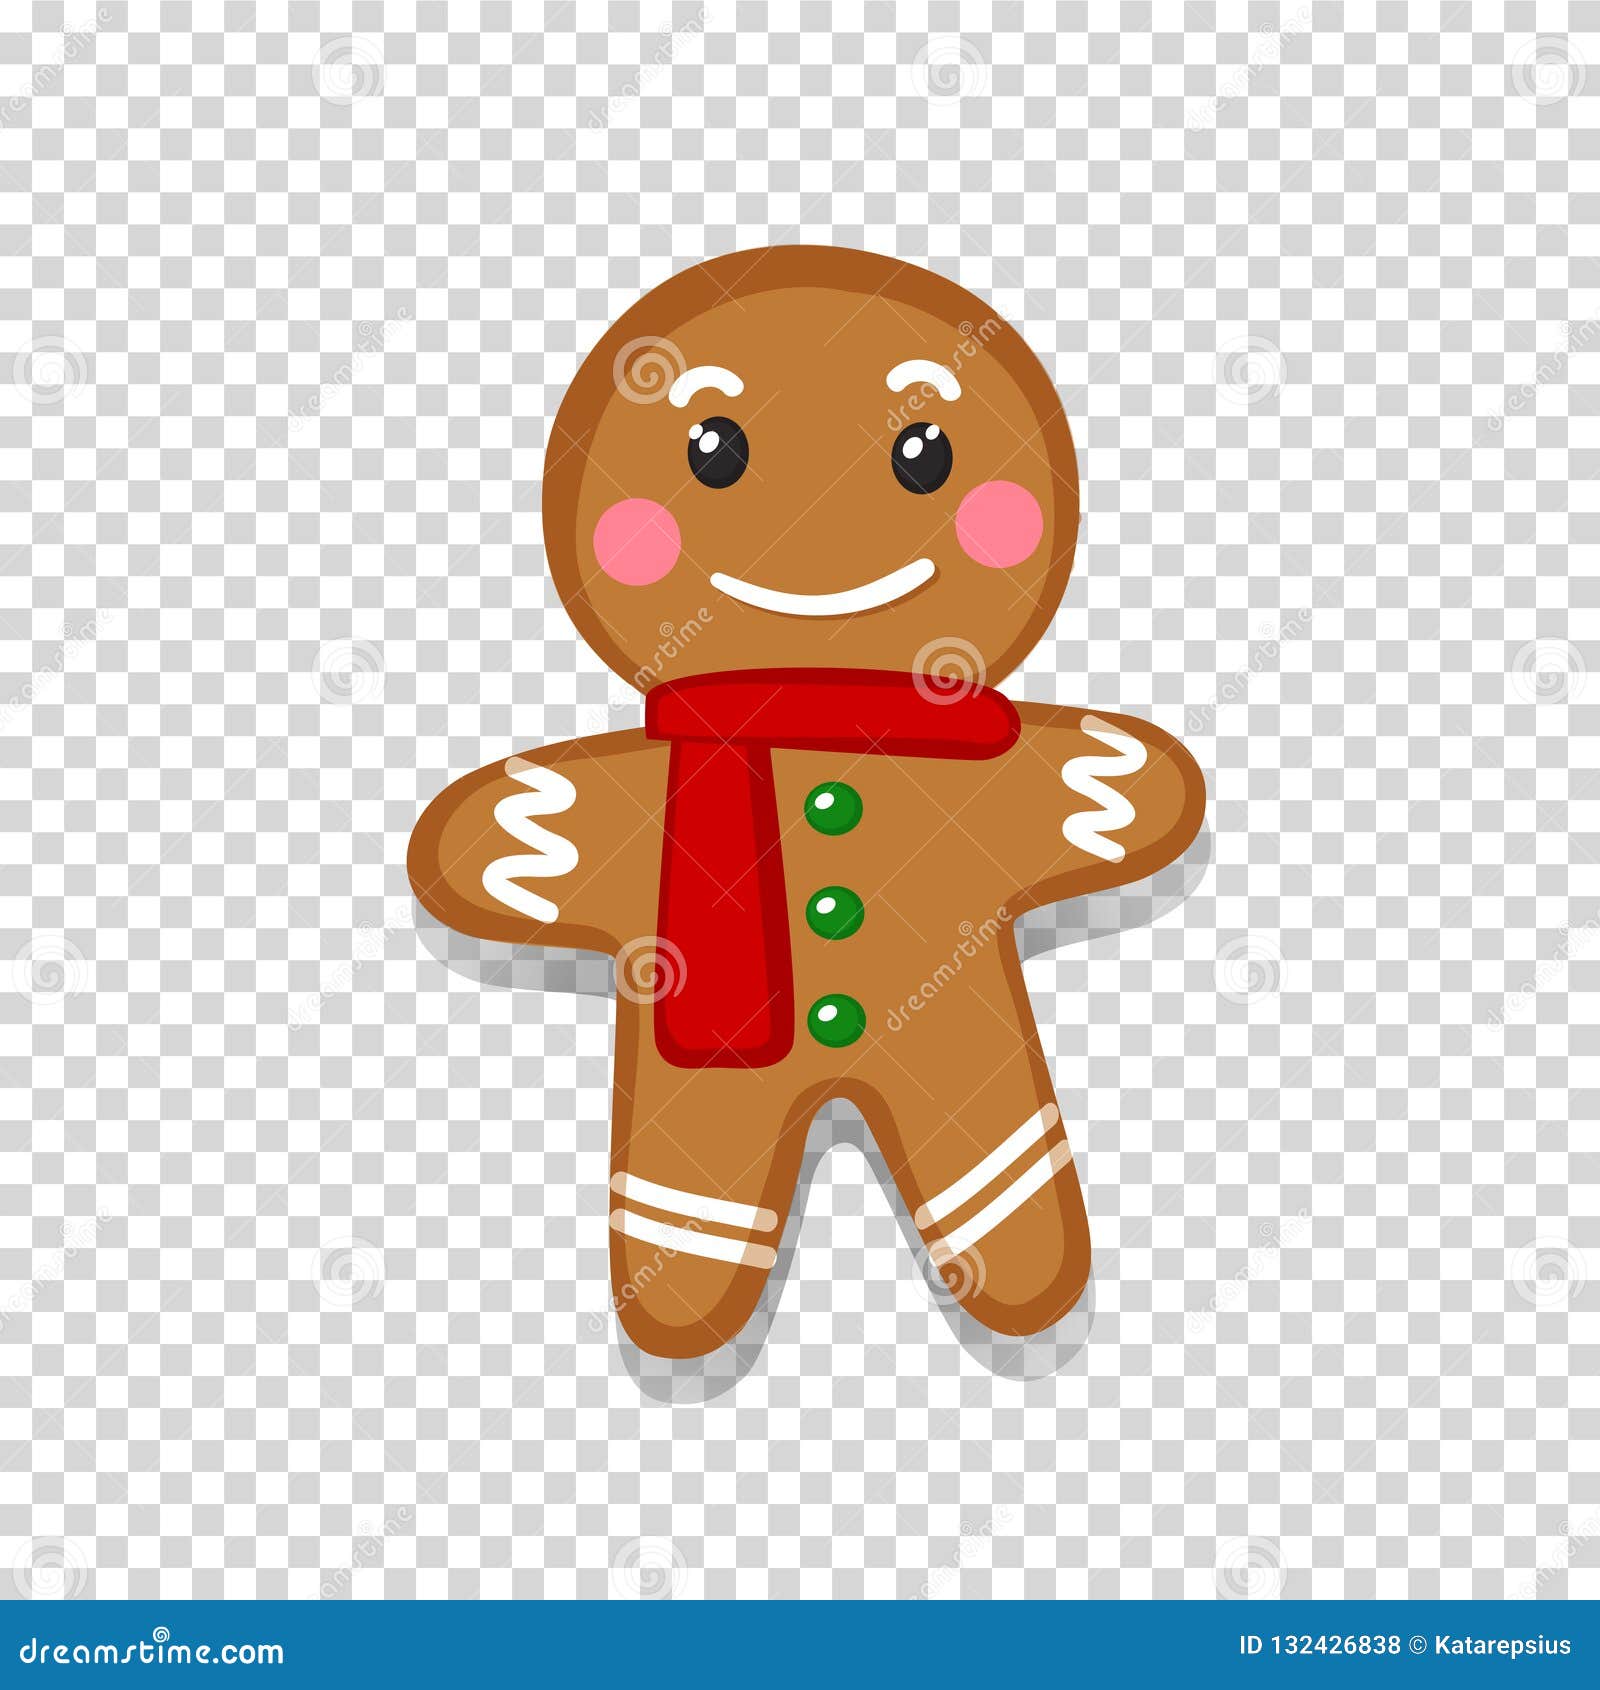 Vector Illustration of an Isolated Gingerbread Man on Transparent Background  Stock Vector - Illustration of celebration, face: 132426838